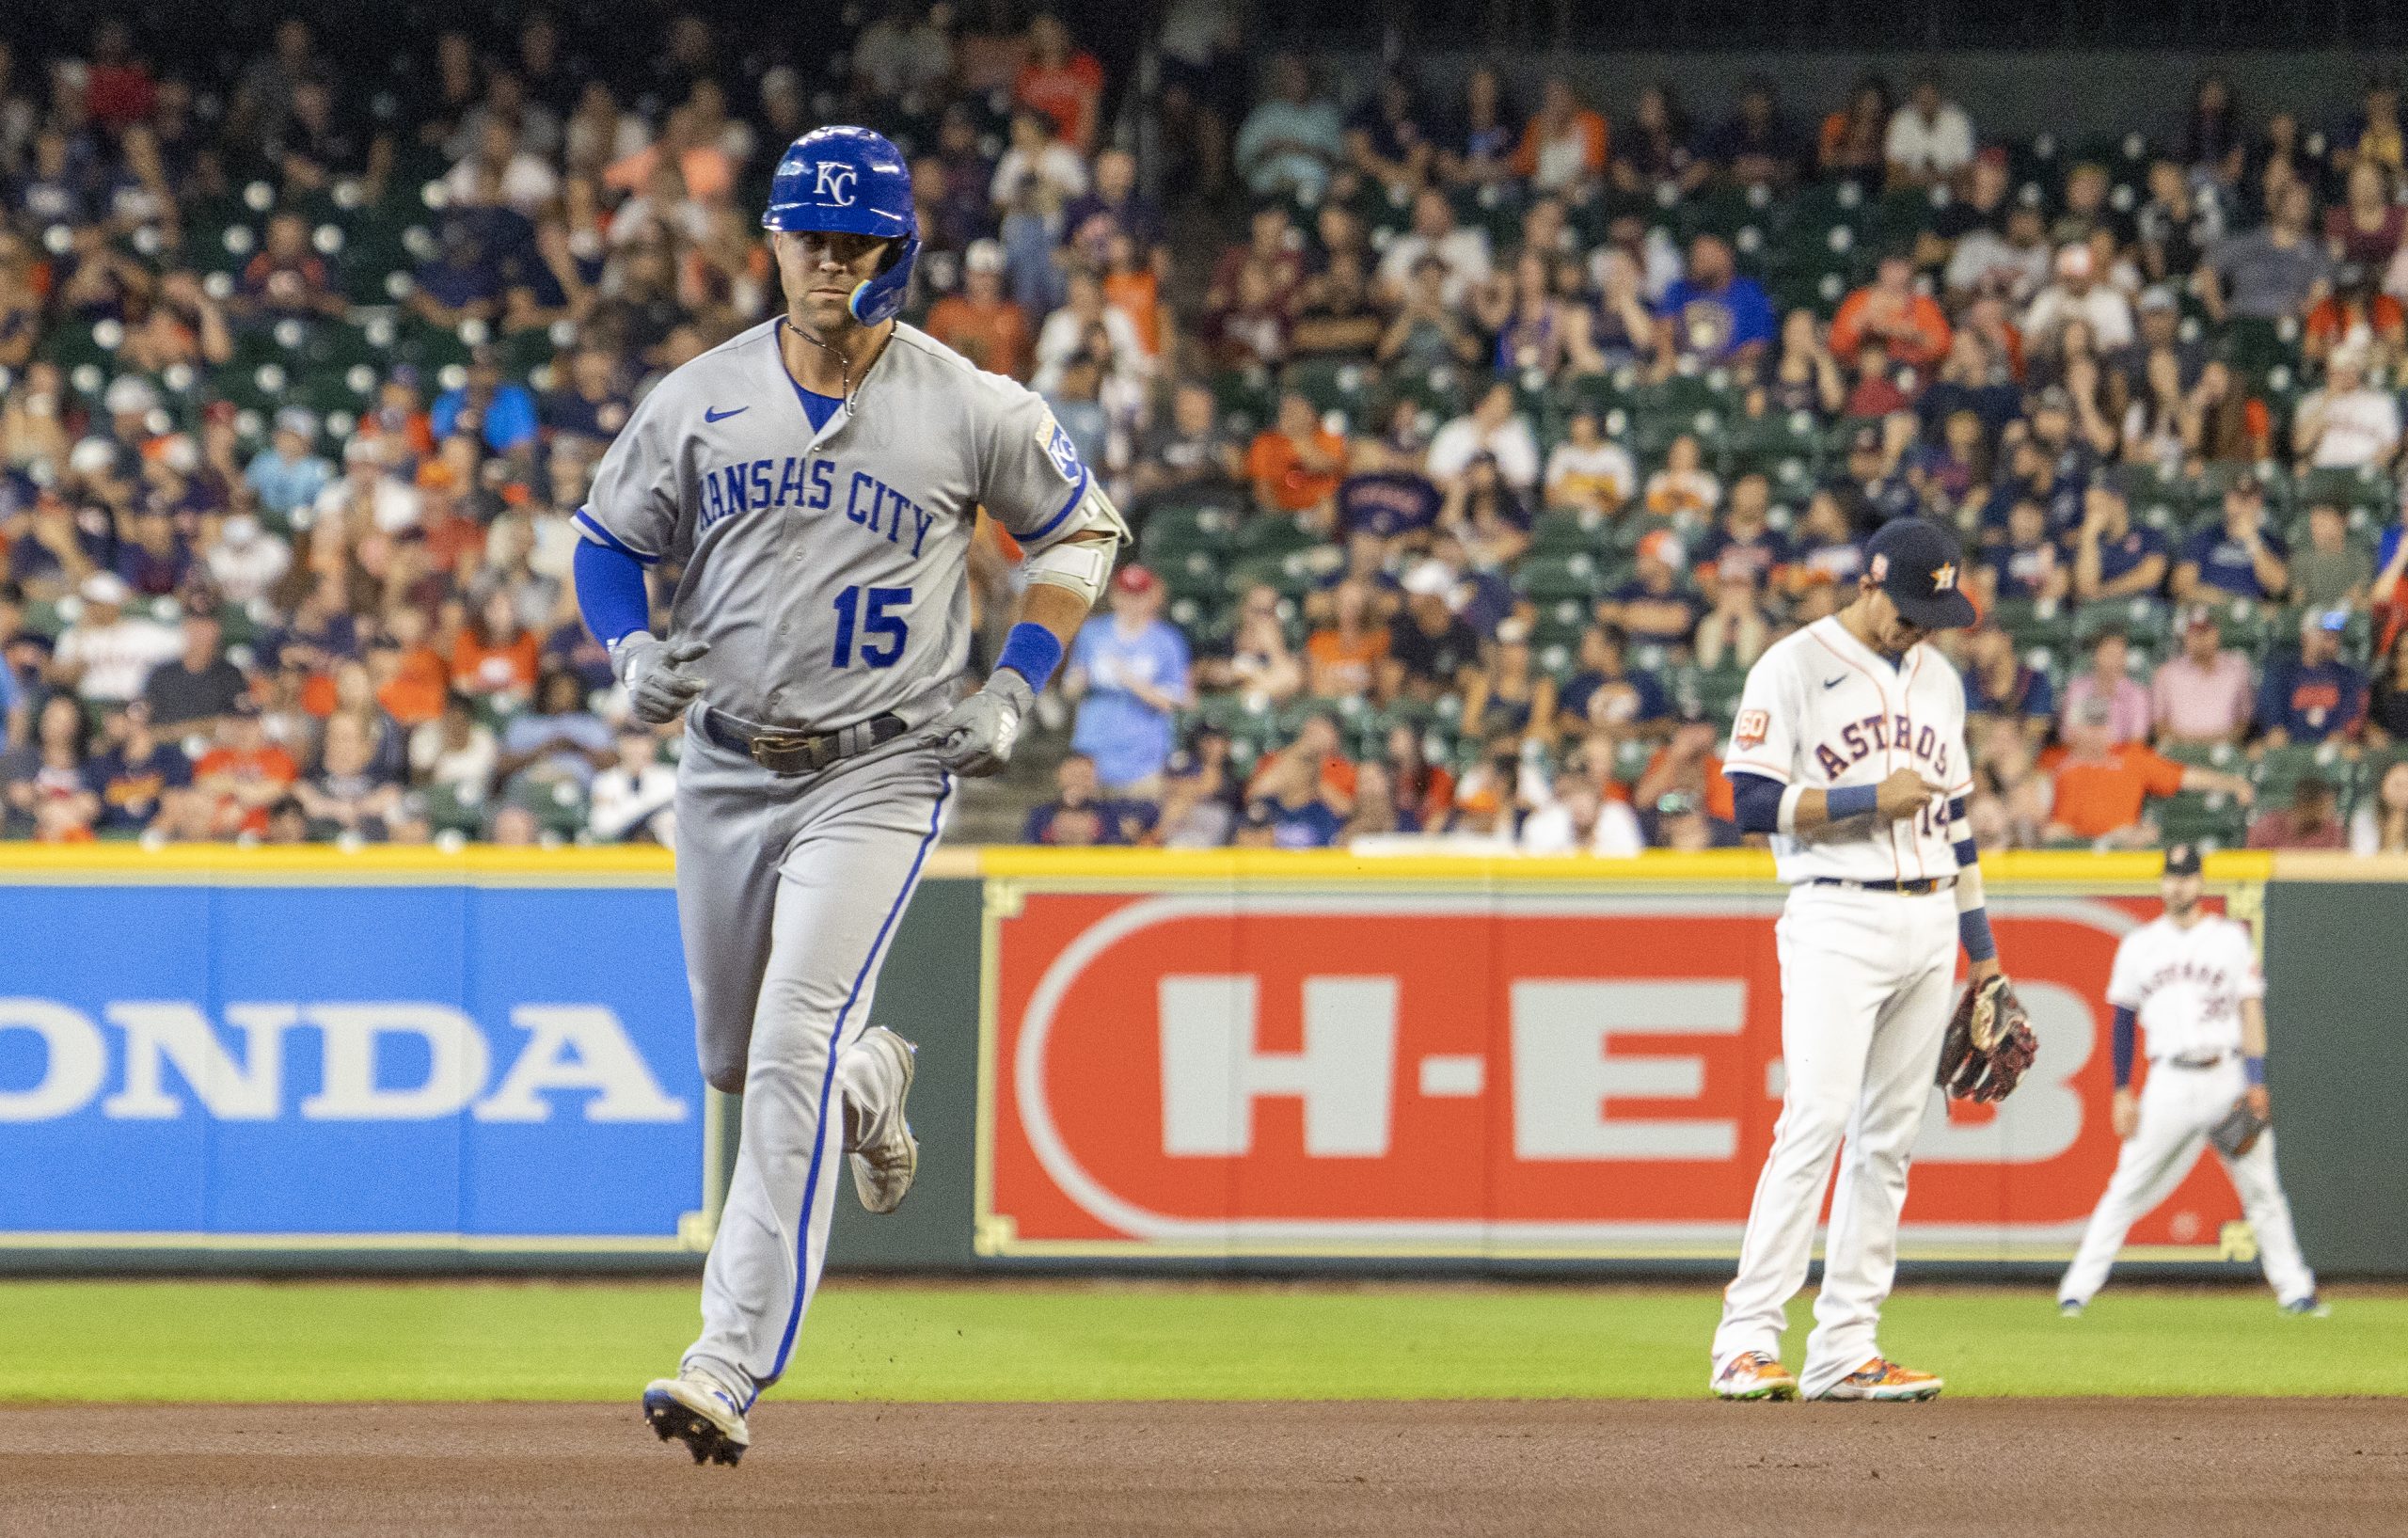 Whit Merrifield clarified his controversial and in his words, "poorly articulated" stance on COVID-19 vaccinations.